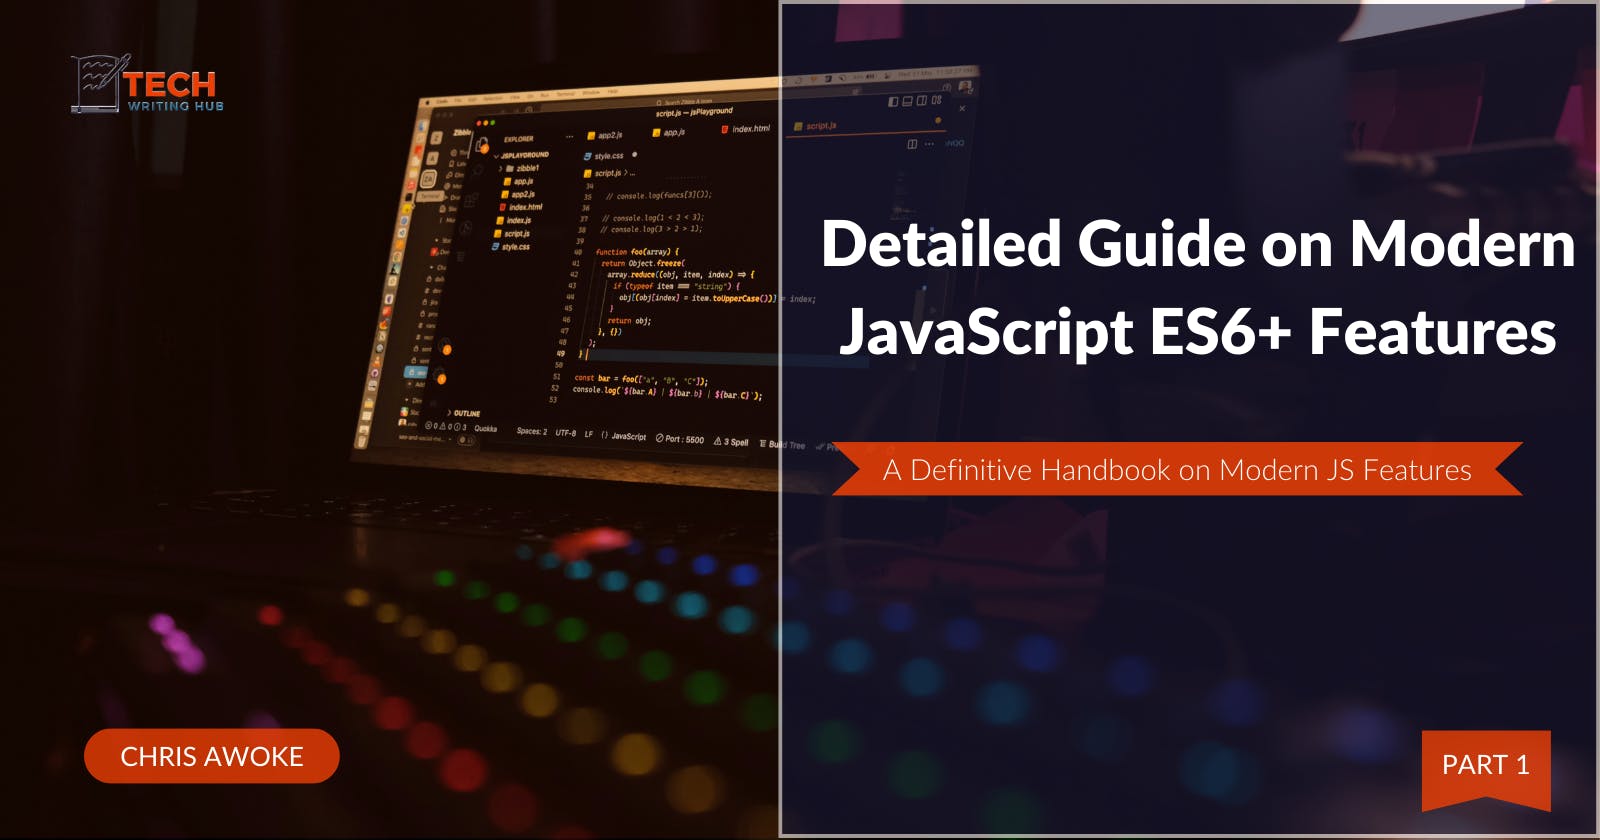 A Detailed Guide on Modern JavaScript ES6+ Features